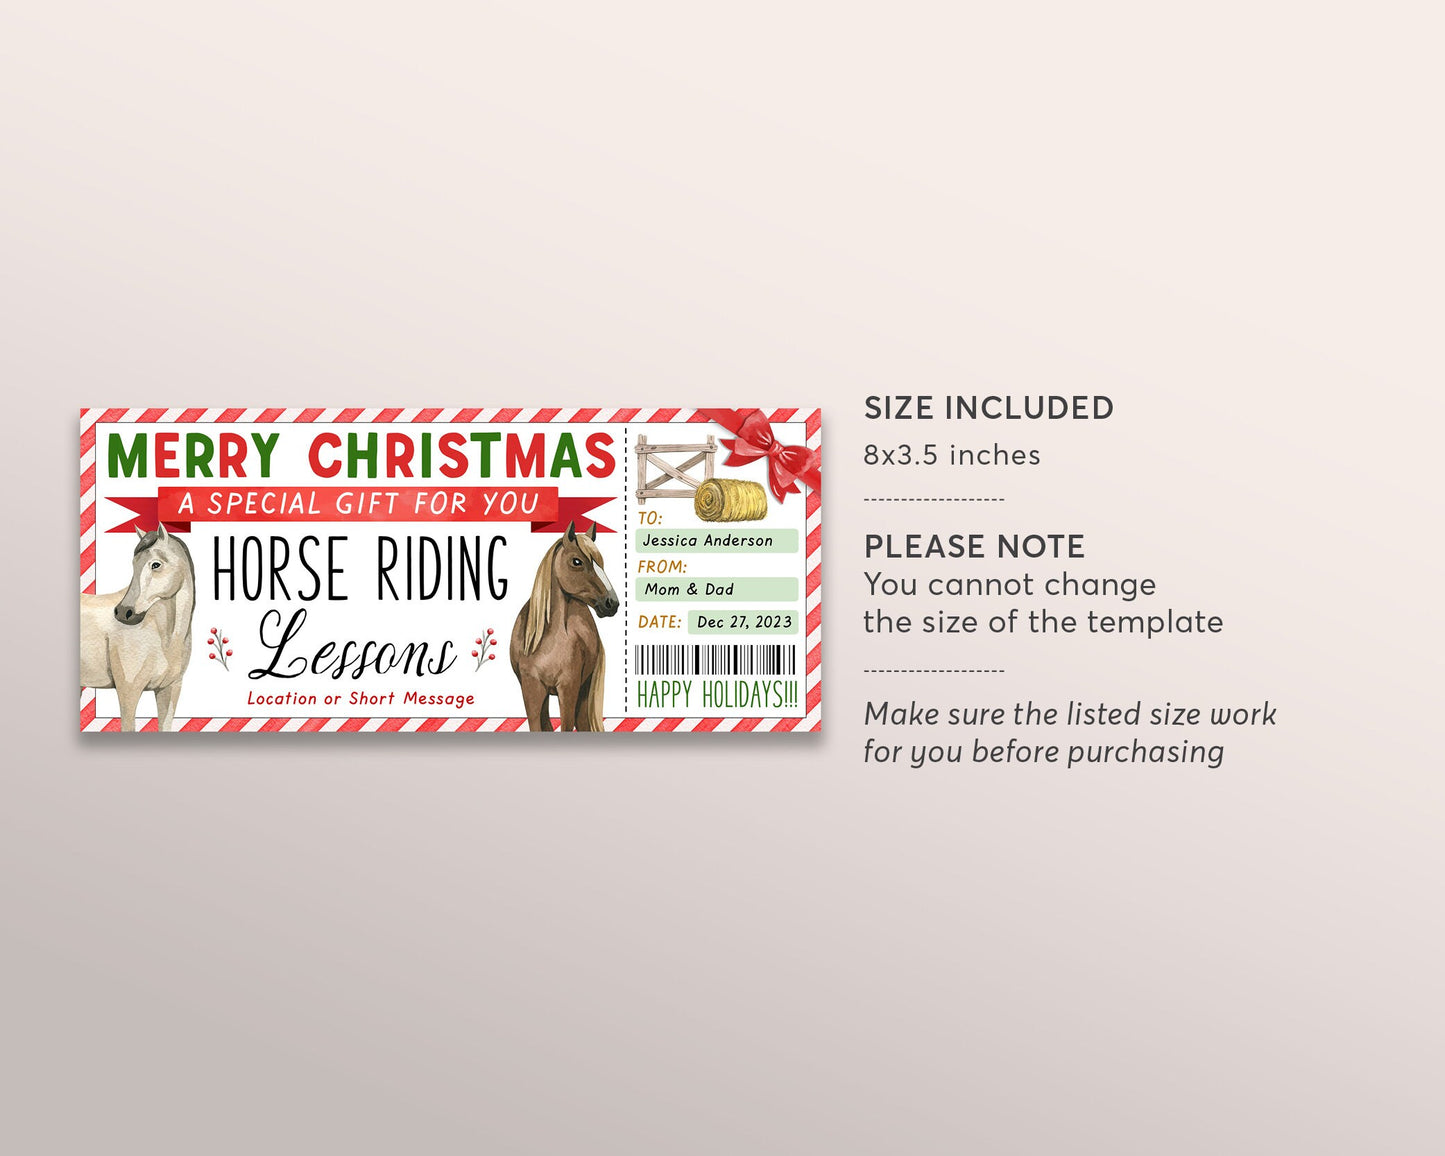 Horse Riding Lessons Christmas Gift Voucher Editable Template, Surprise Horseback Riding Class Holiday Gift Certificate Stocking Stuffer